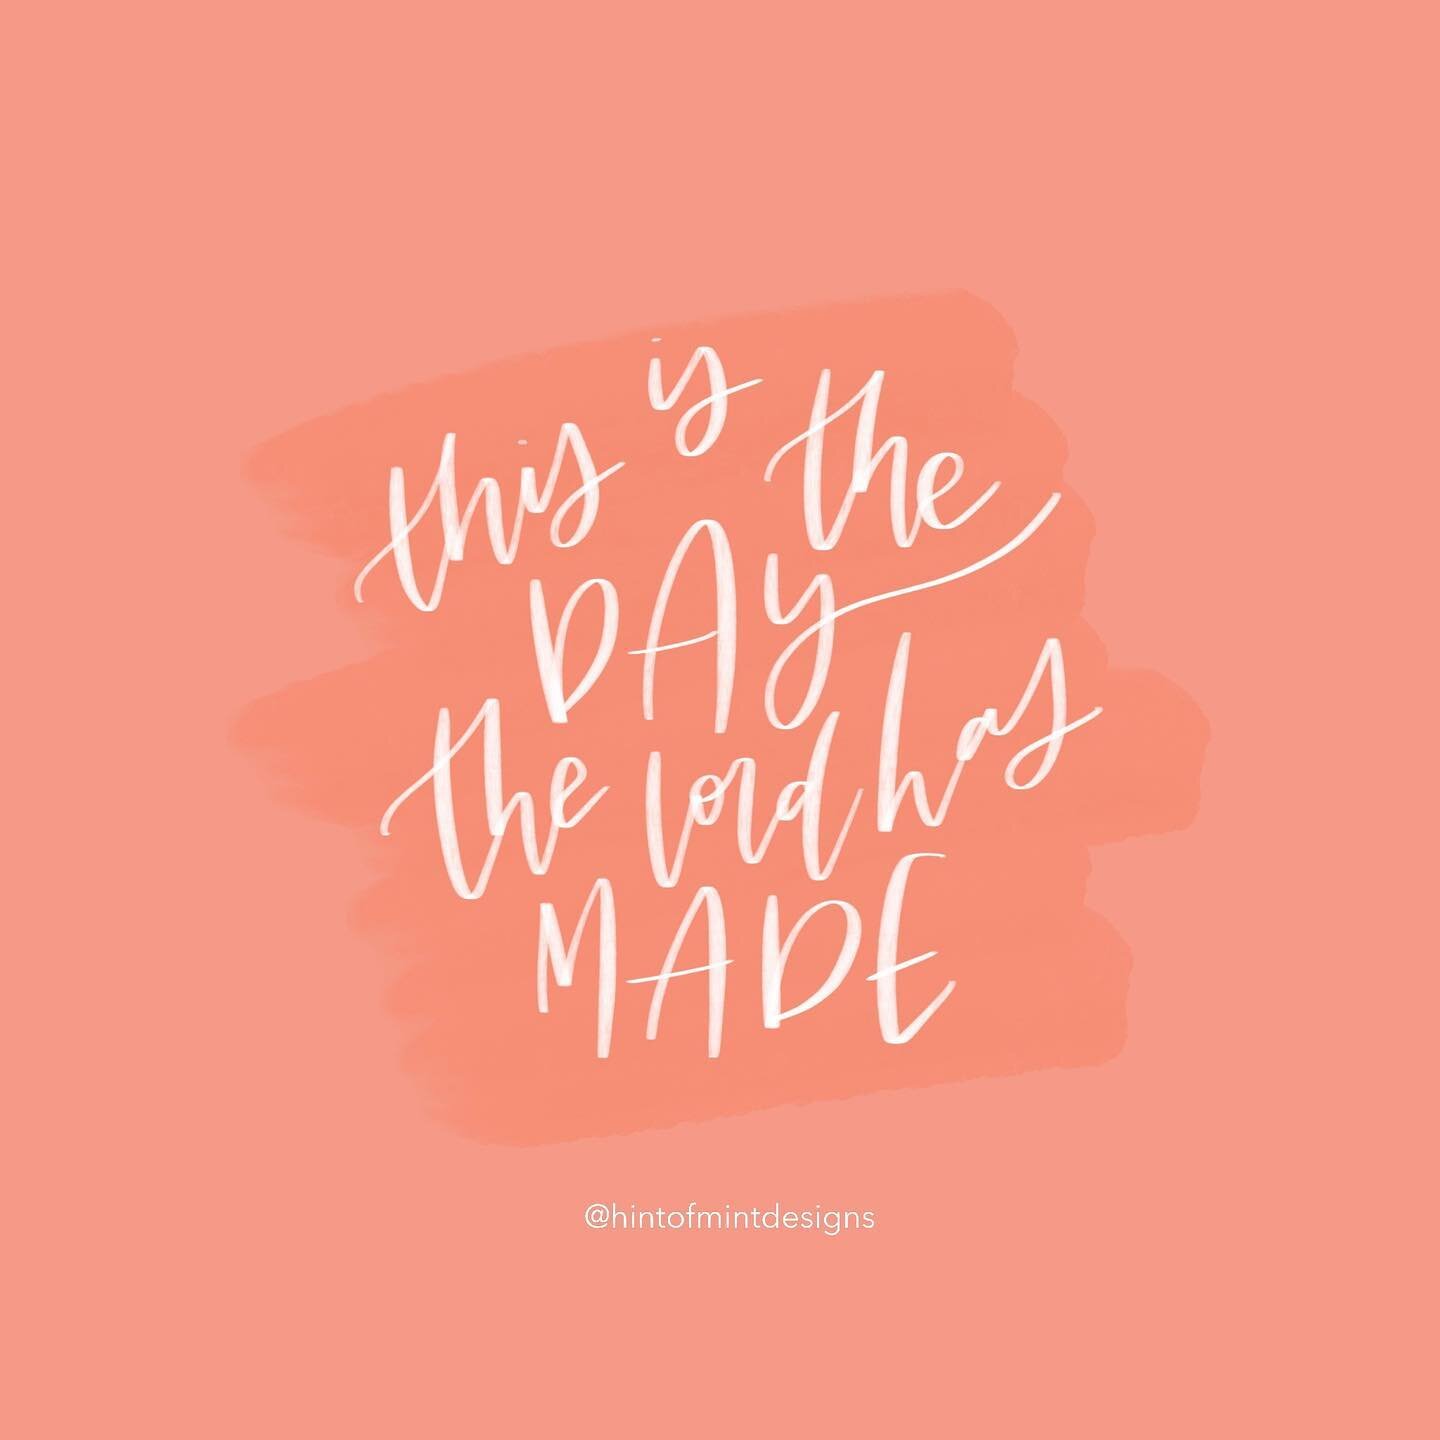 Happy Easter, friends! We&rsquo;re thankful for sunny weather, outdoor Mass and the hope that comes with the resurrection. 
&bull;
&bull;
&bull;
#easter #eastermass #catholic #thisisthedaythelordhasmade #happyeaster #hoppyeaster #lettering #handlette